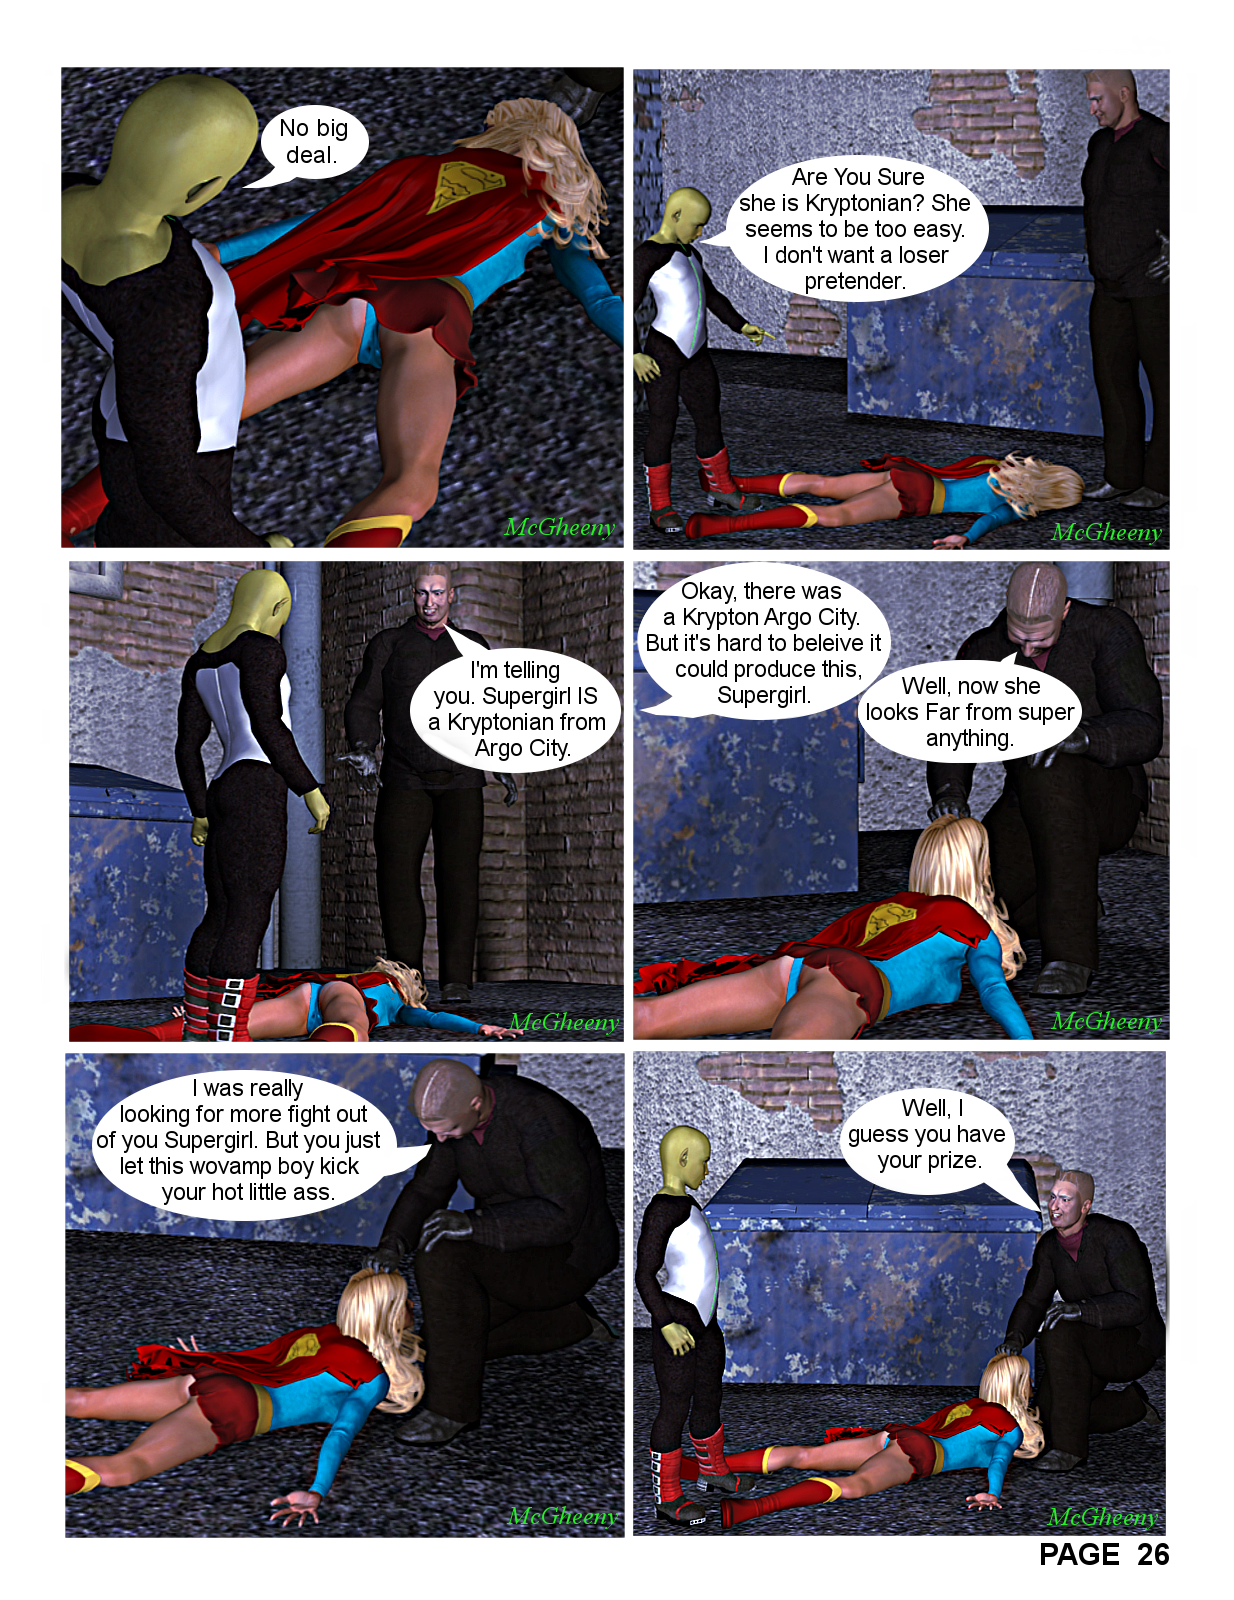 Supergirl in Banors Prize Page 26.png